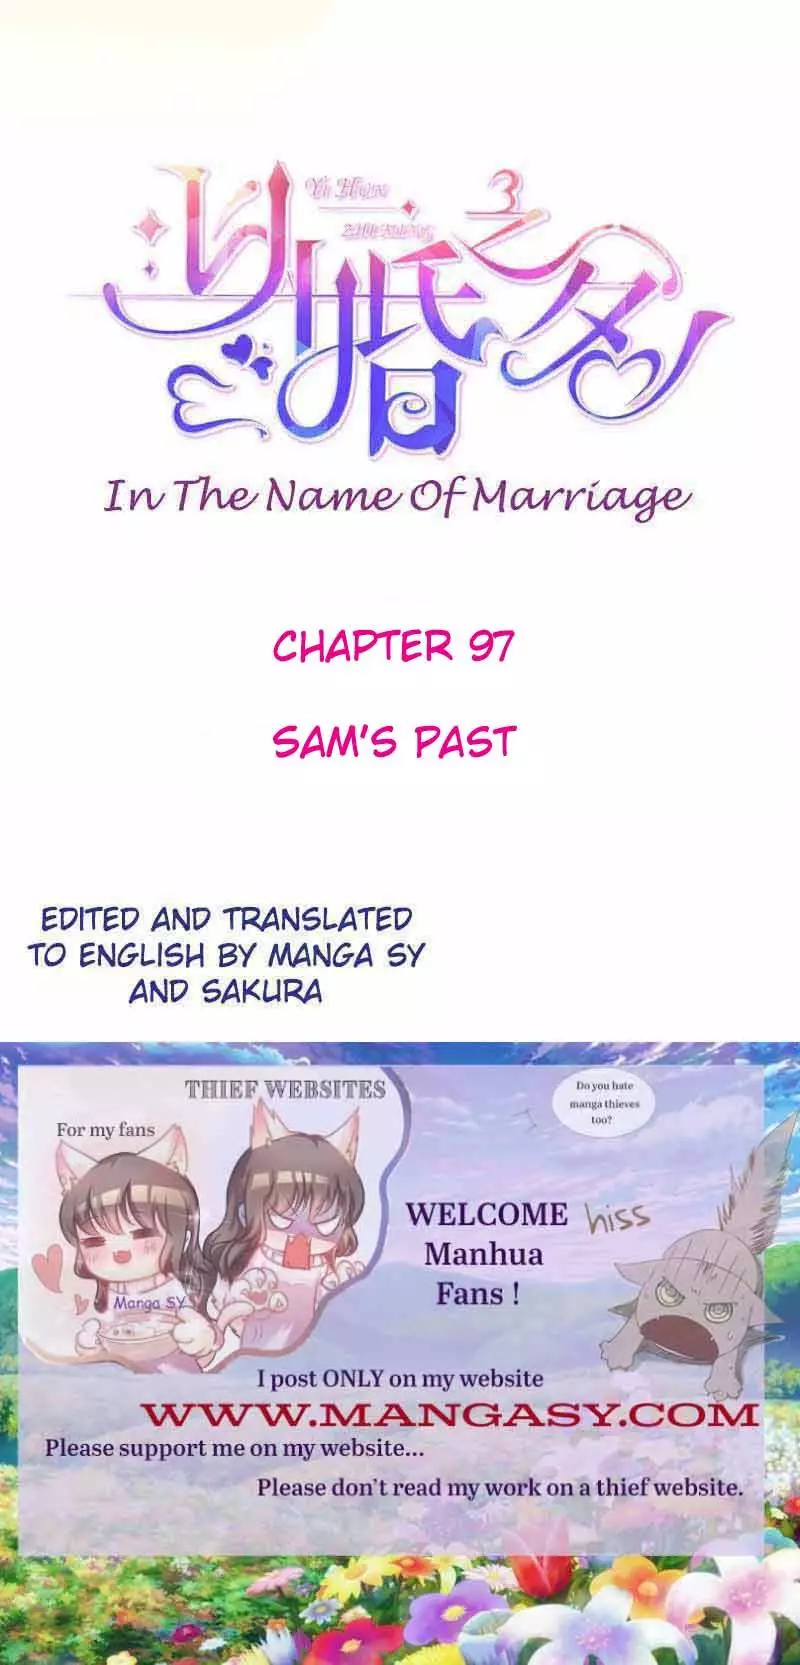 In The Name Of Marriage - 97 page 1-9728709e